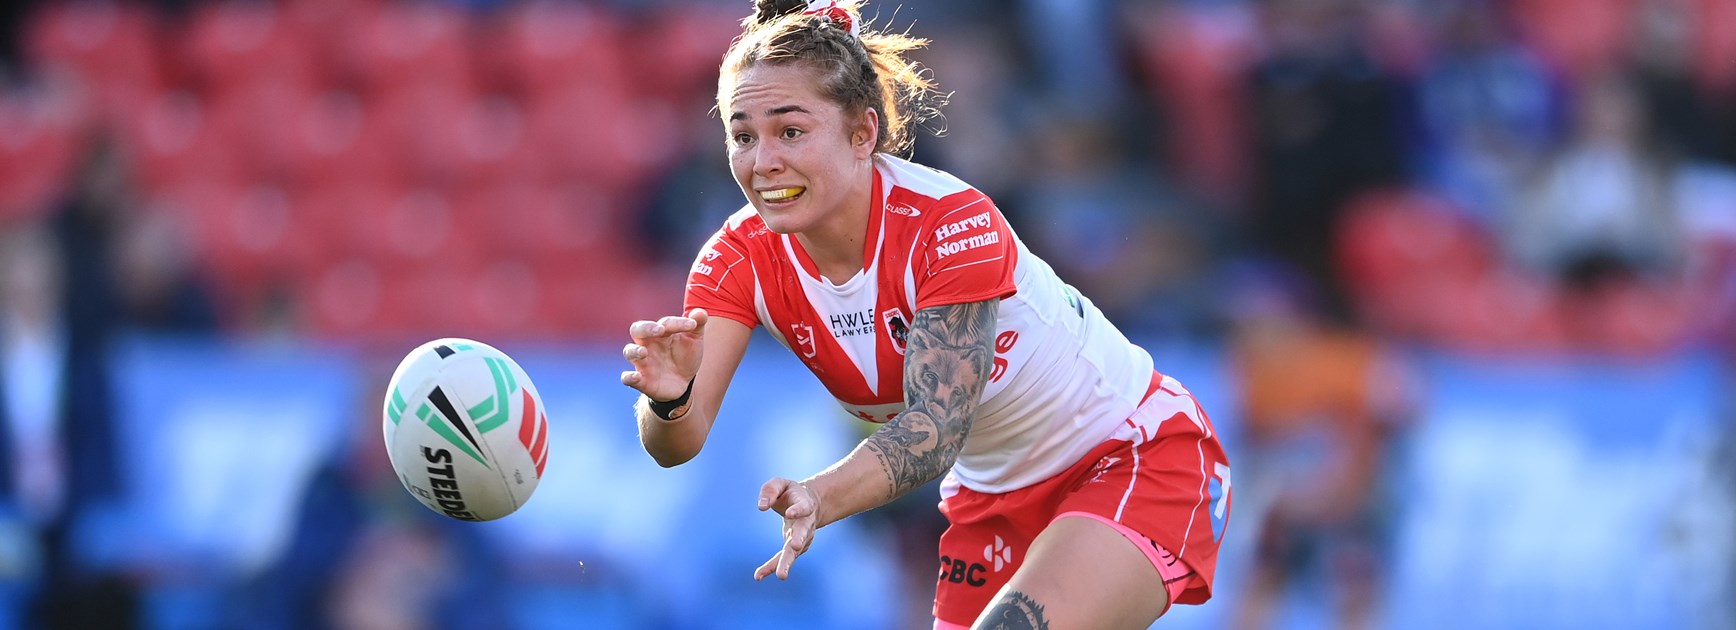 ‘I’m always going to be a Dragon’: Targett eager to finish NRLW career on a high